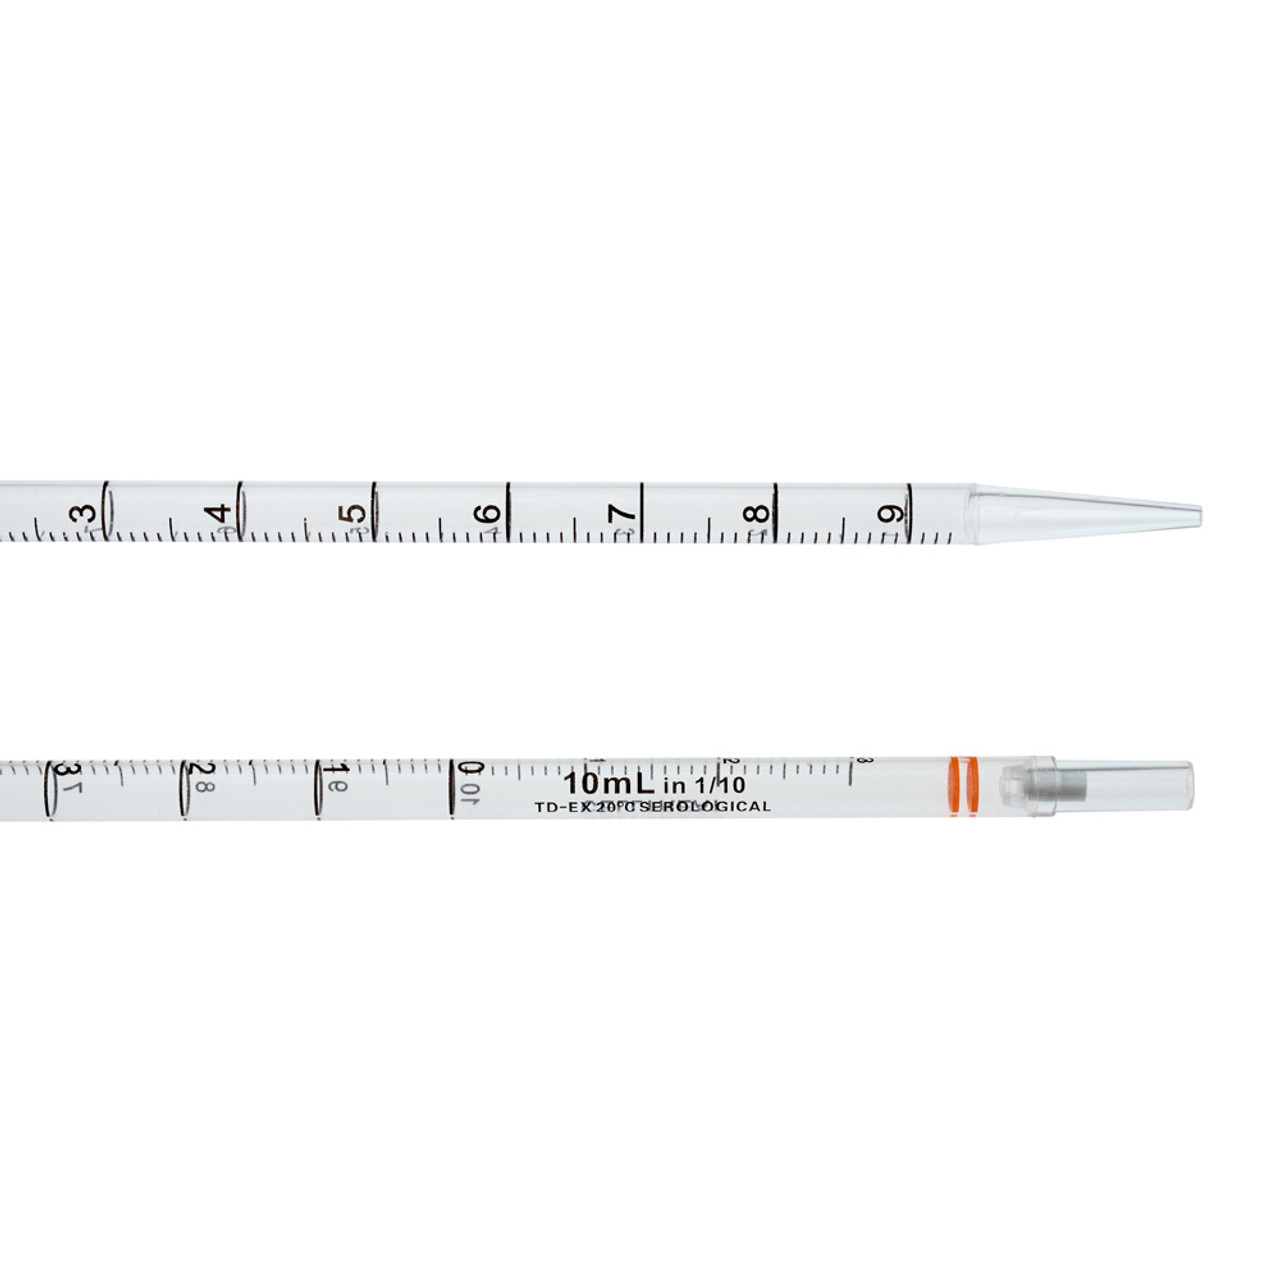 10mL Polystyrene Serological Pipette, RNase and DNase Free, STERILE,  Individually Wrapped in Plastic/Plastic, Packed in Bags, 200/CS